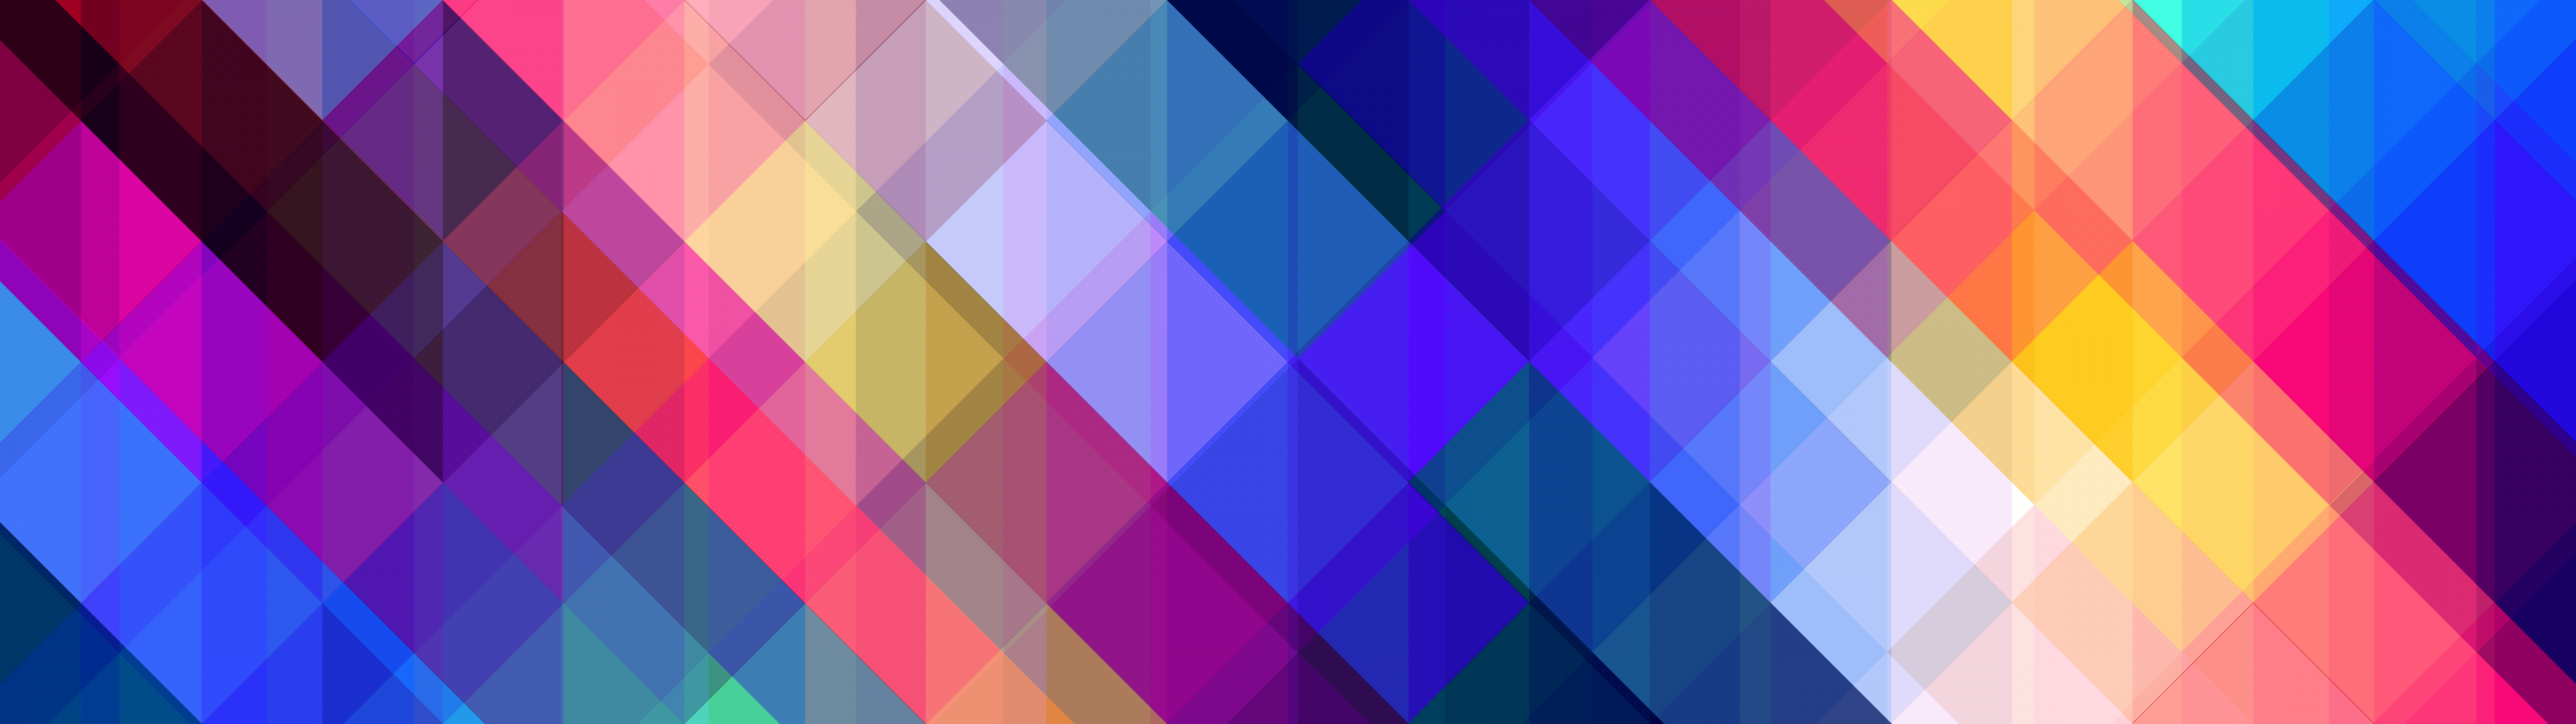 Colorful background Wallpaper 4K, Pattern, Geometric, Abstract, #5678